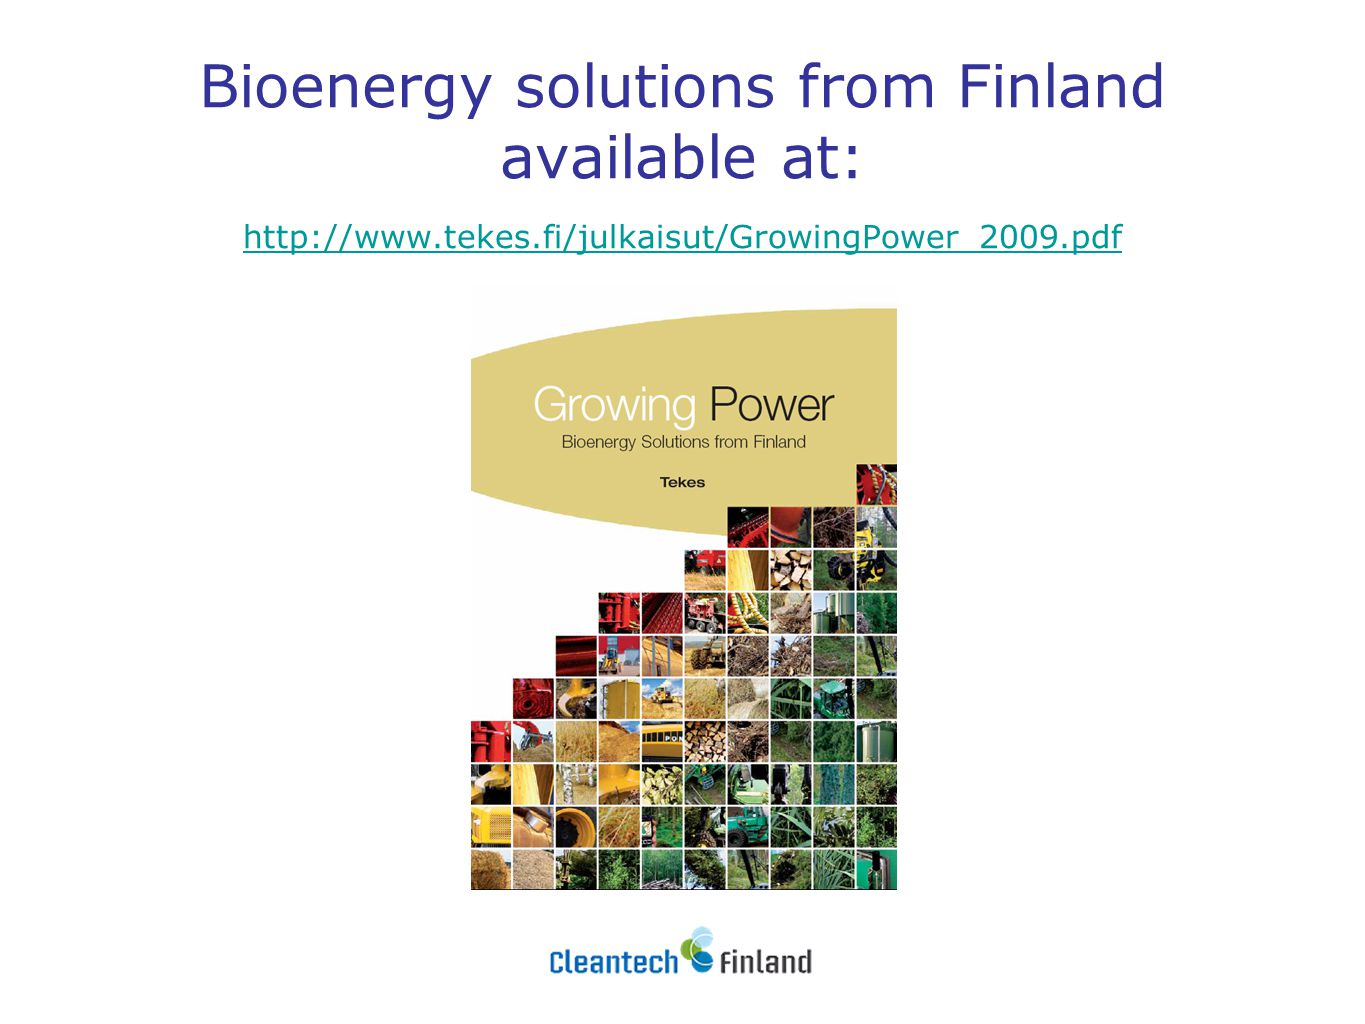 Bioenergy solutions from Finland available at: